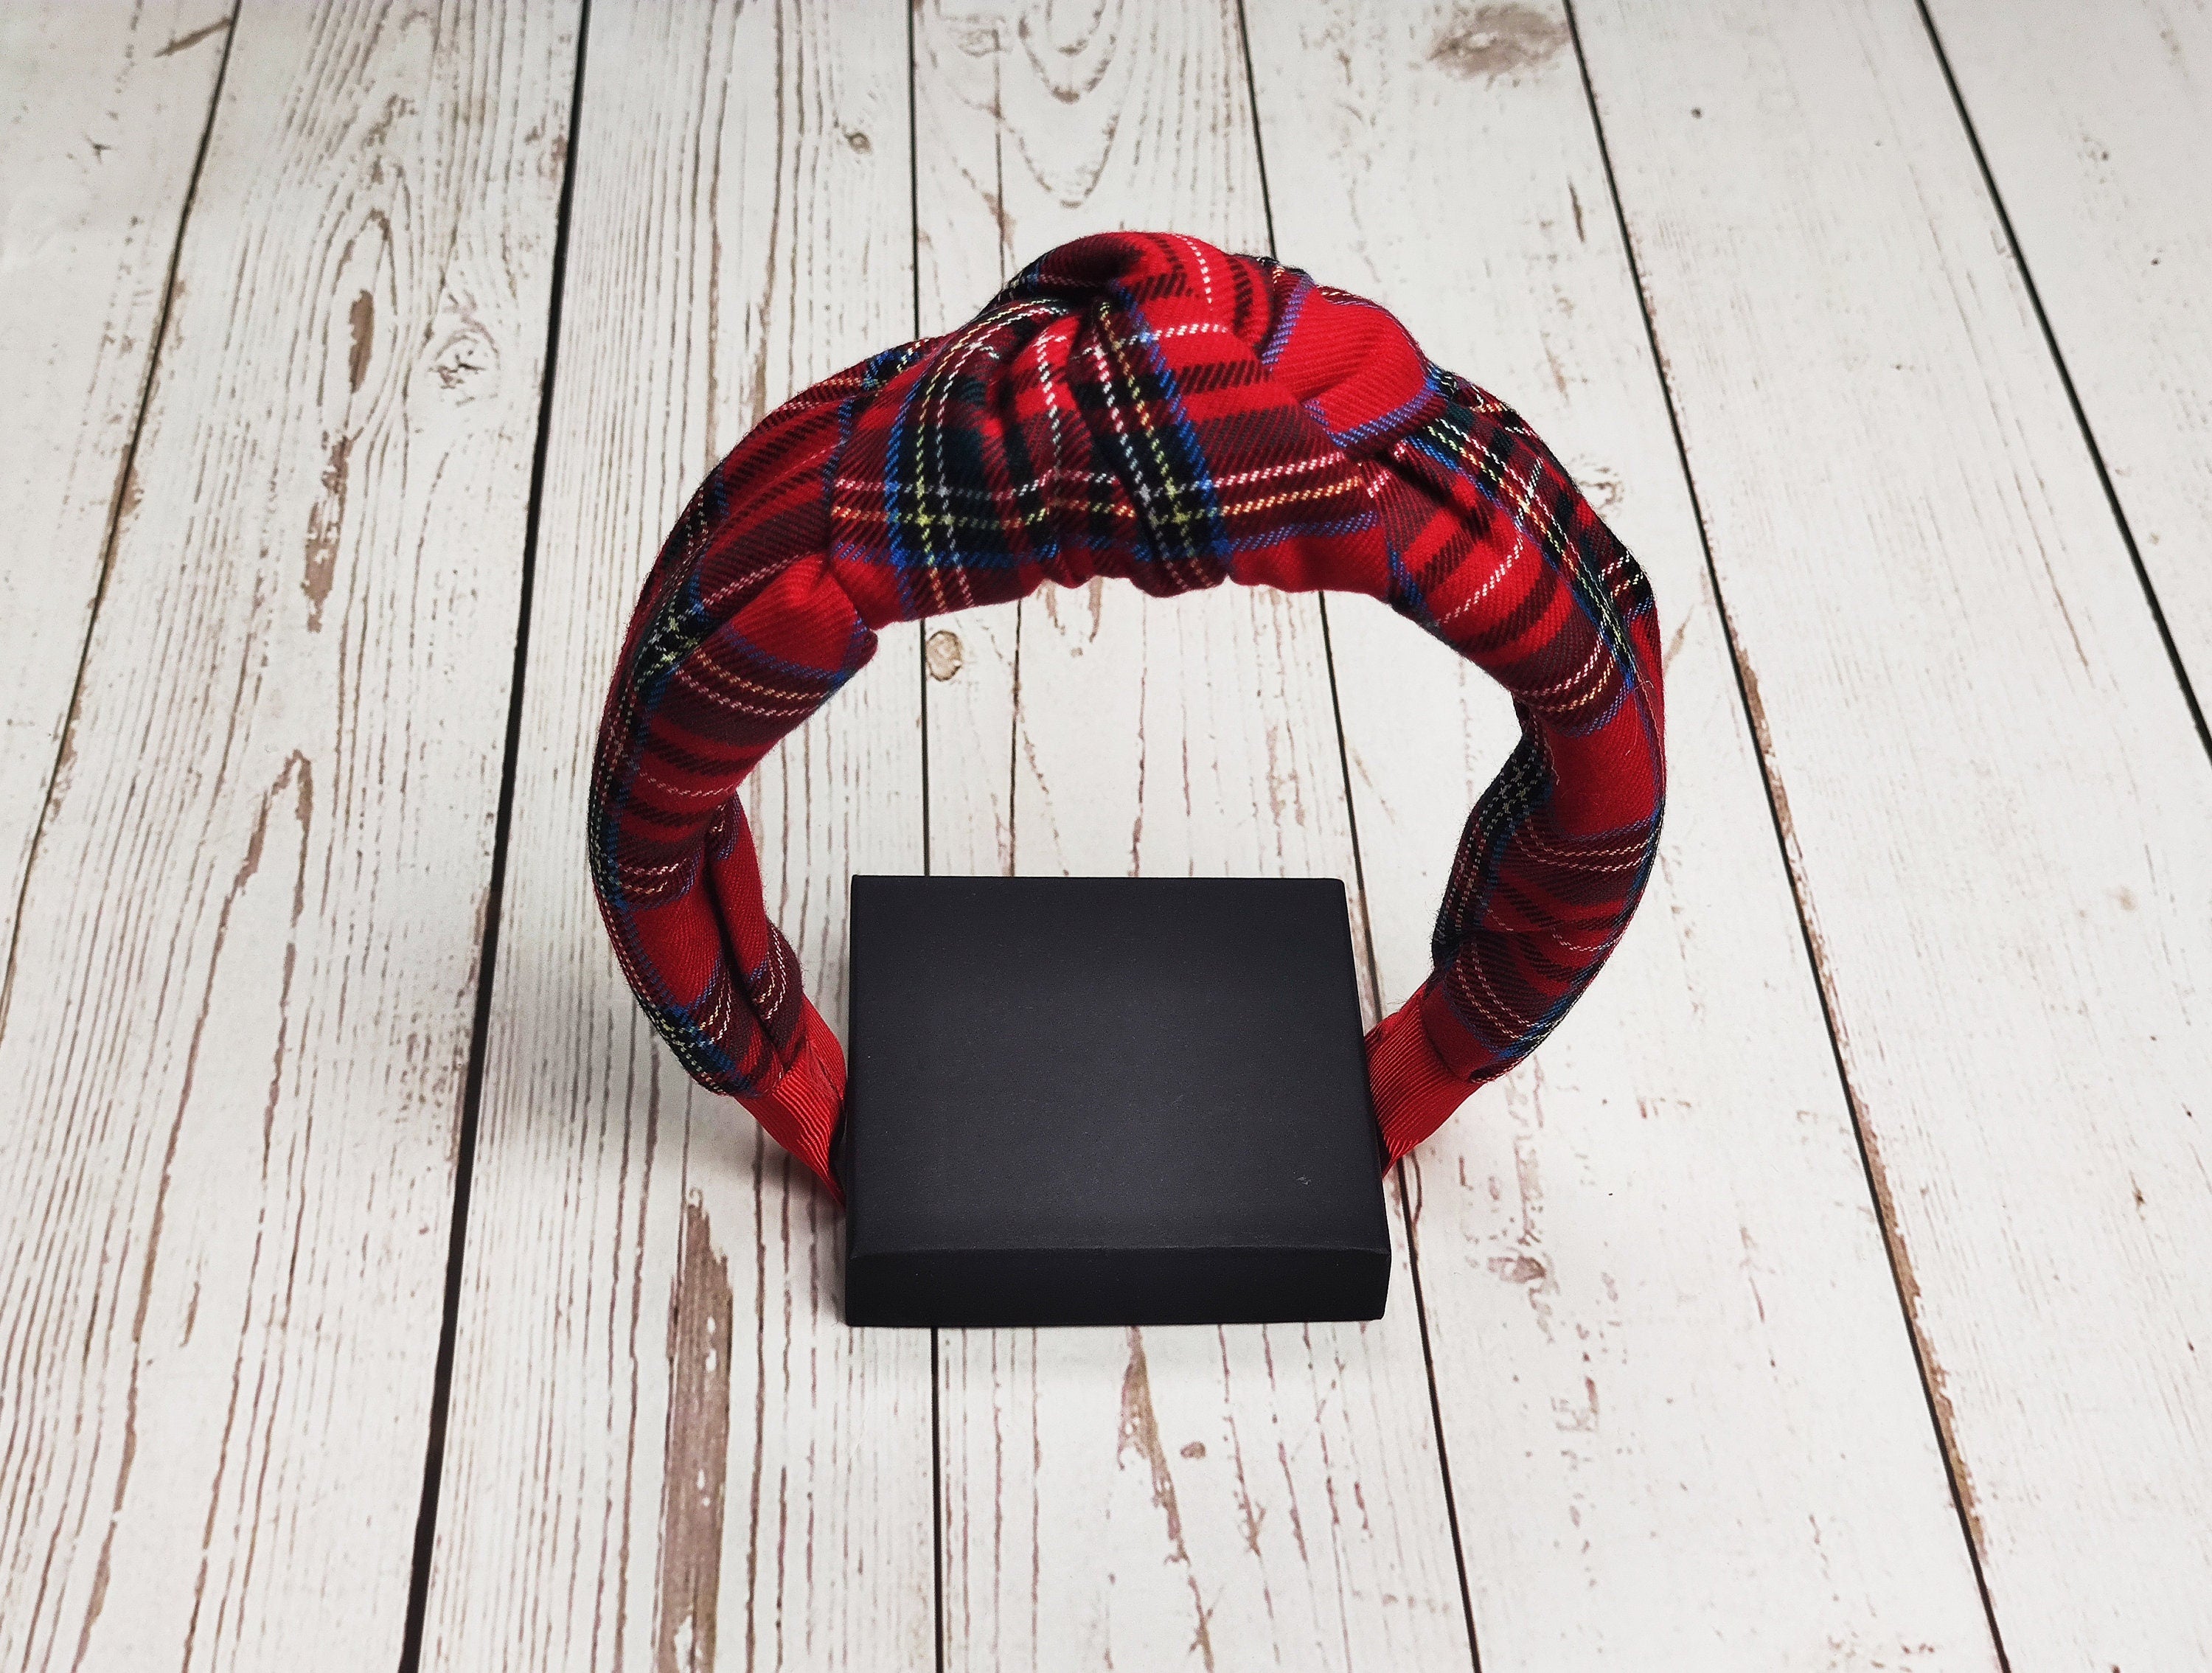 Add some flare to your autumn wardrobe with our trendy red color pattern headbands. Choose from the traditional plaid pattern or modern geometric designs to add a pop of color to your look.